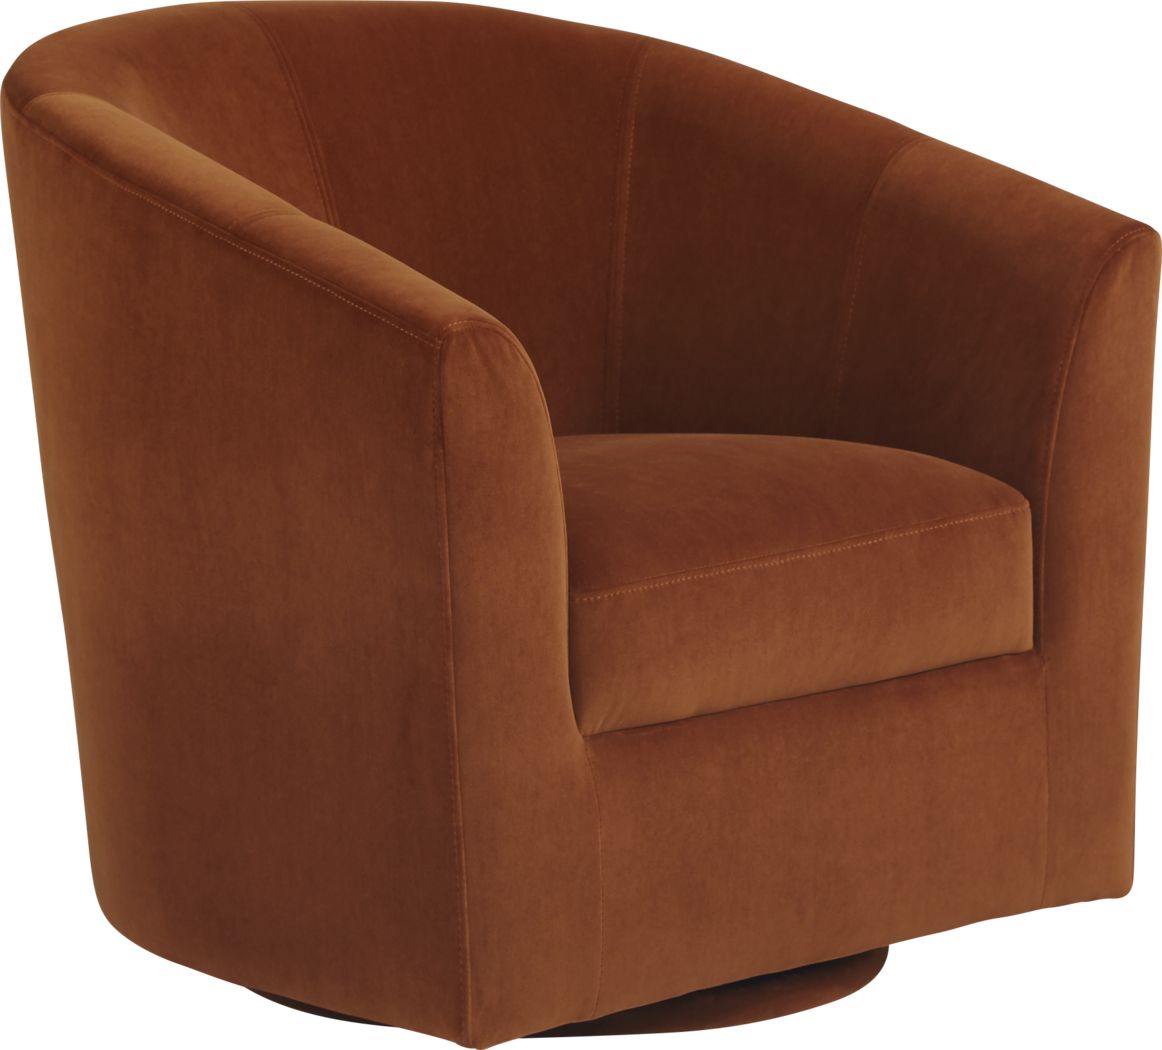 Sentosa Rust Accent Swivel Chair - Rooms To Go